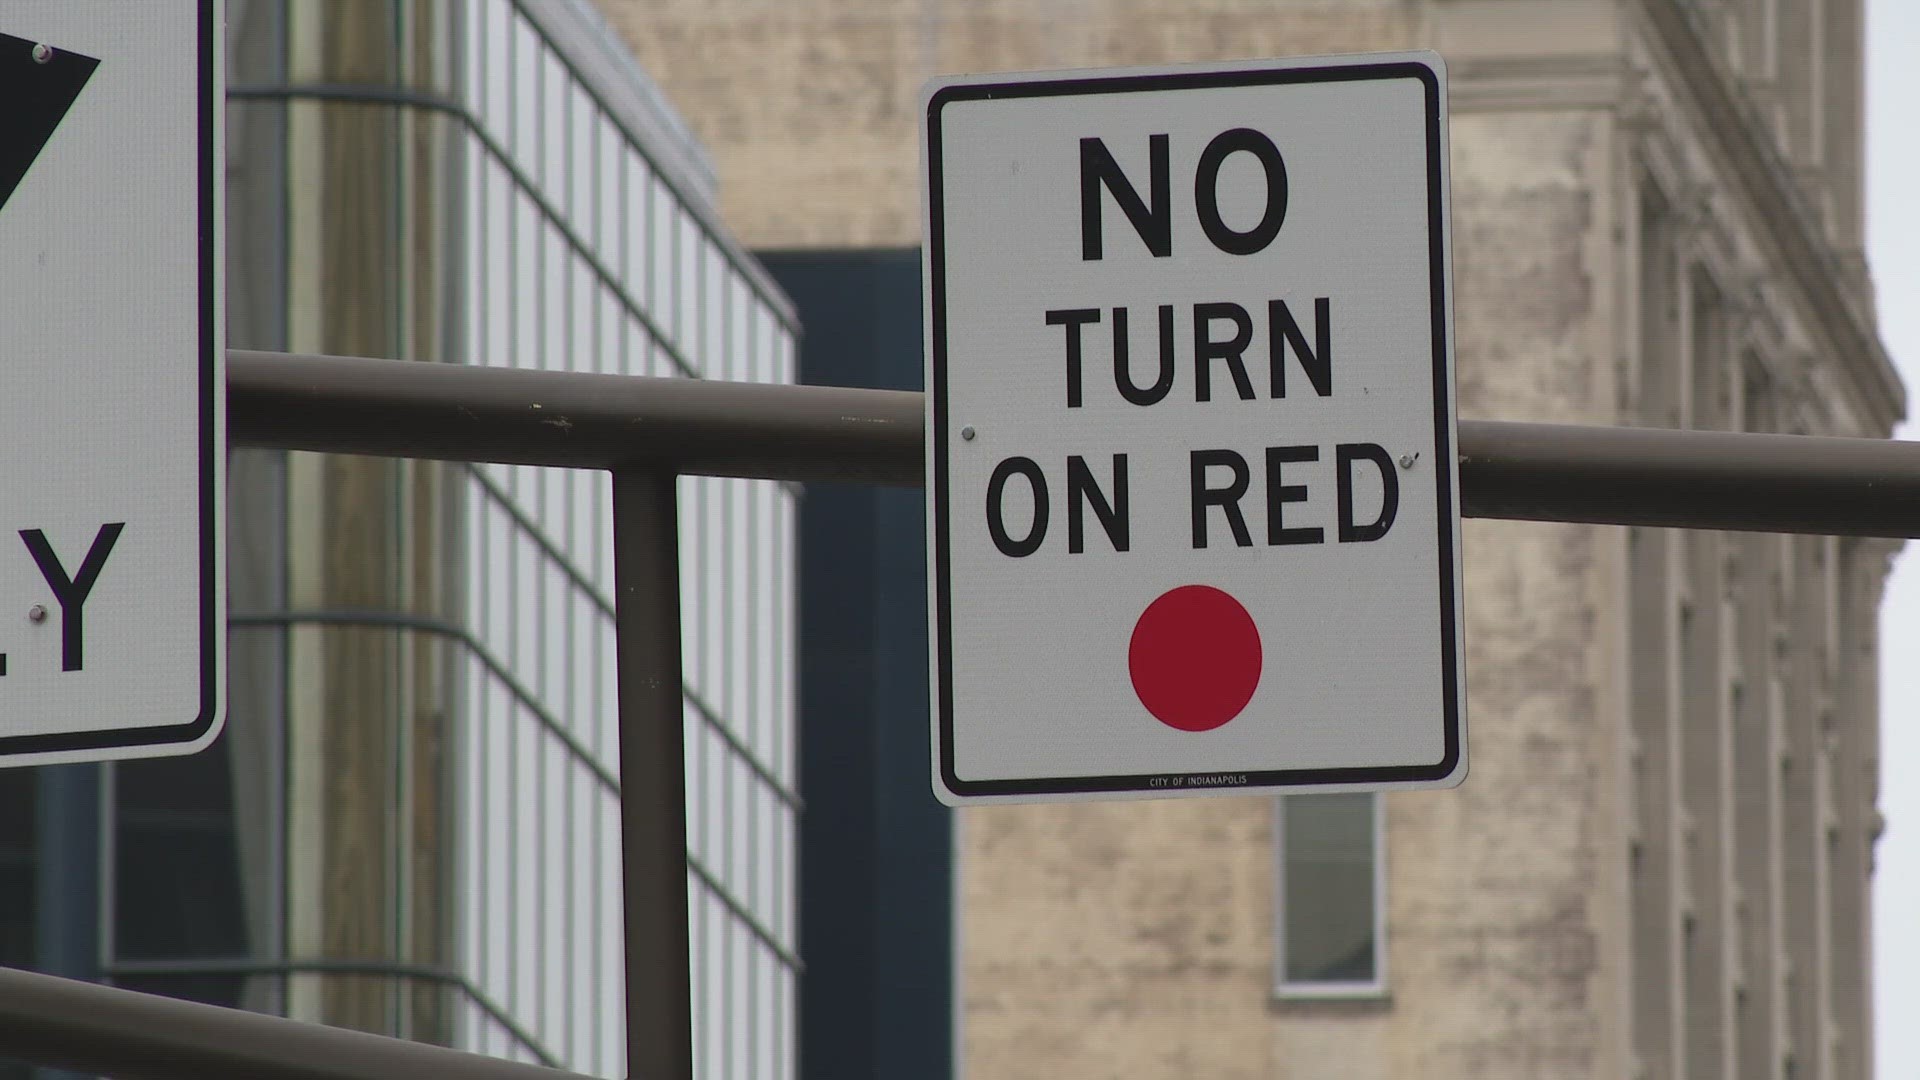 13News reporter Gina Glaros shows how new no-turn-on-red signs are being installed all over Indianapolis.